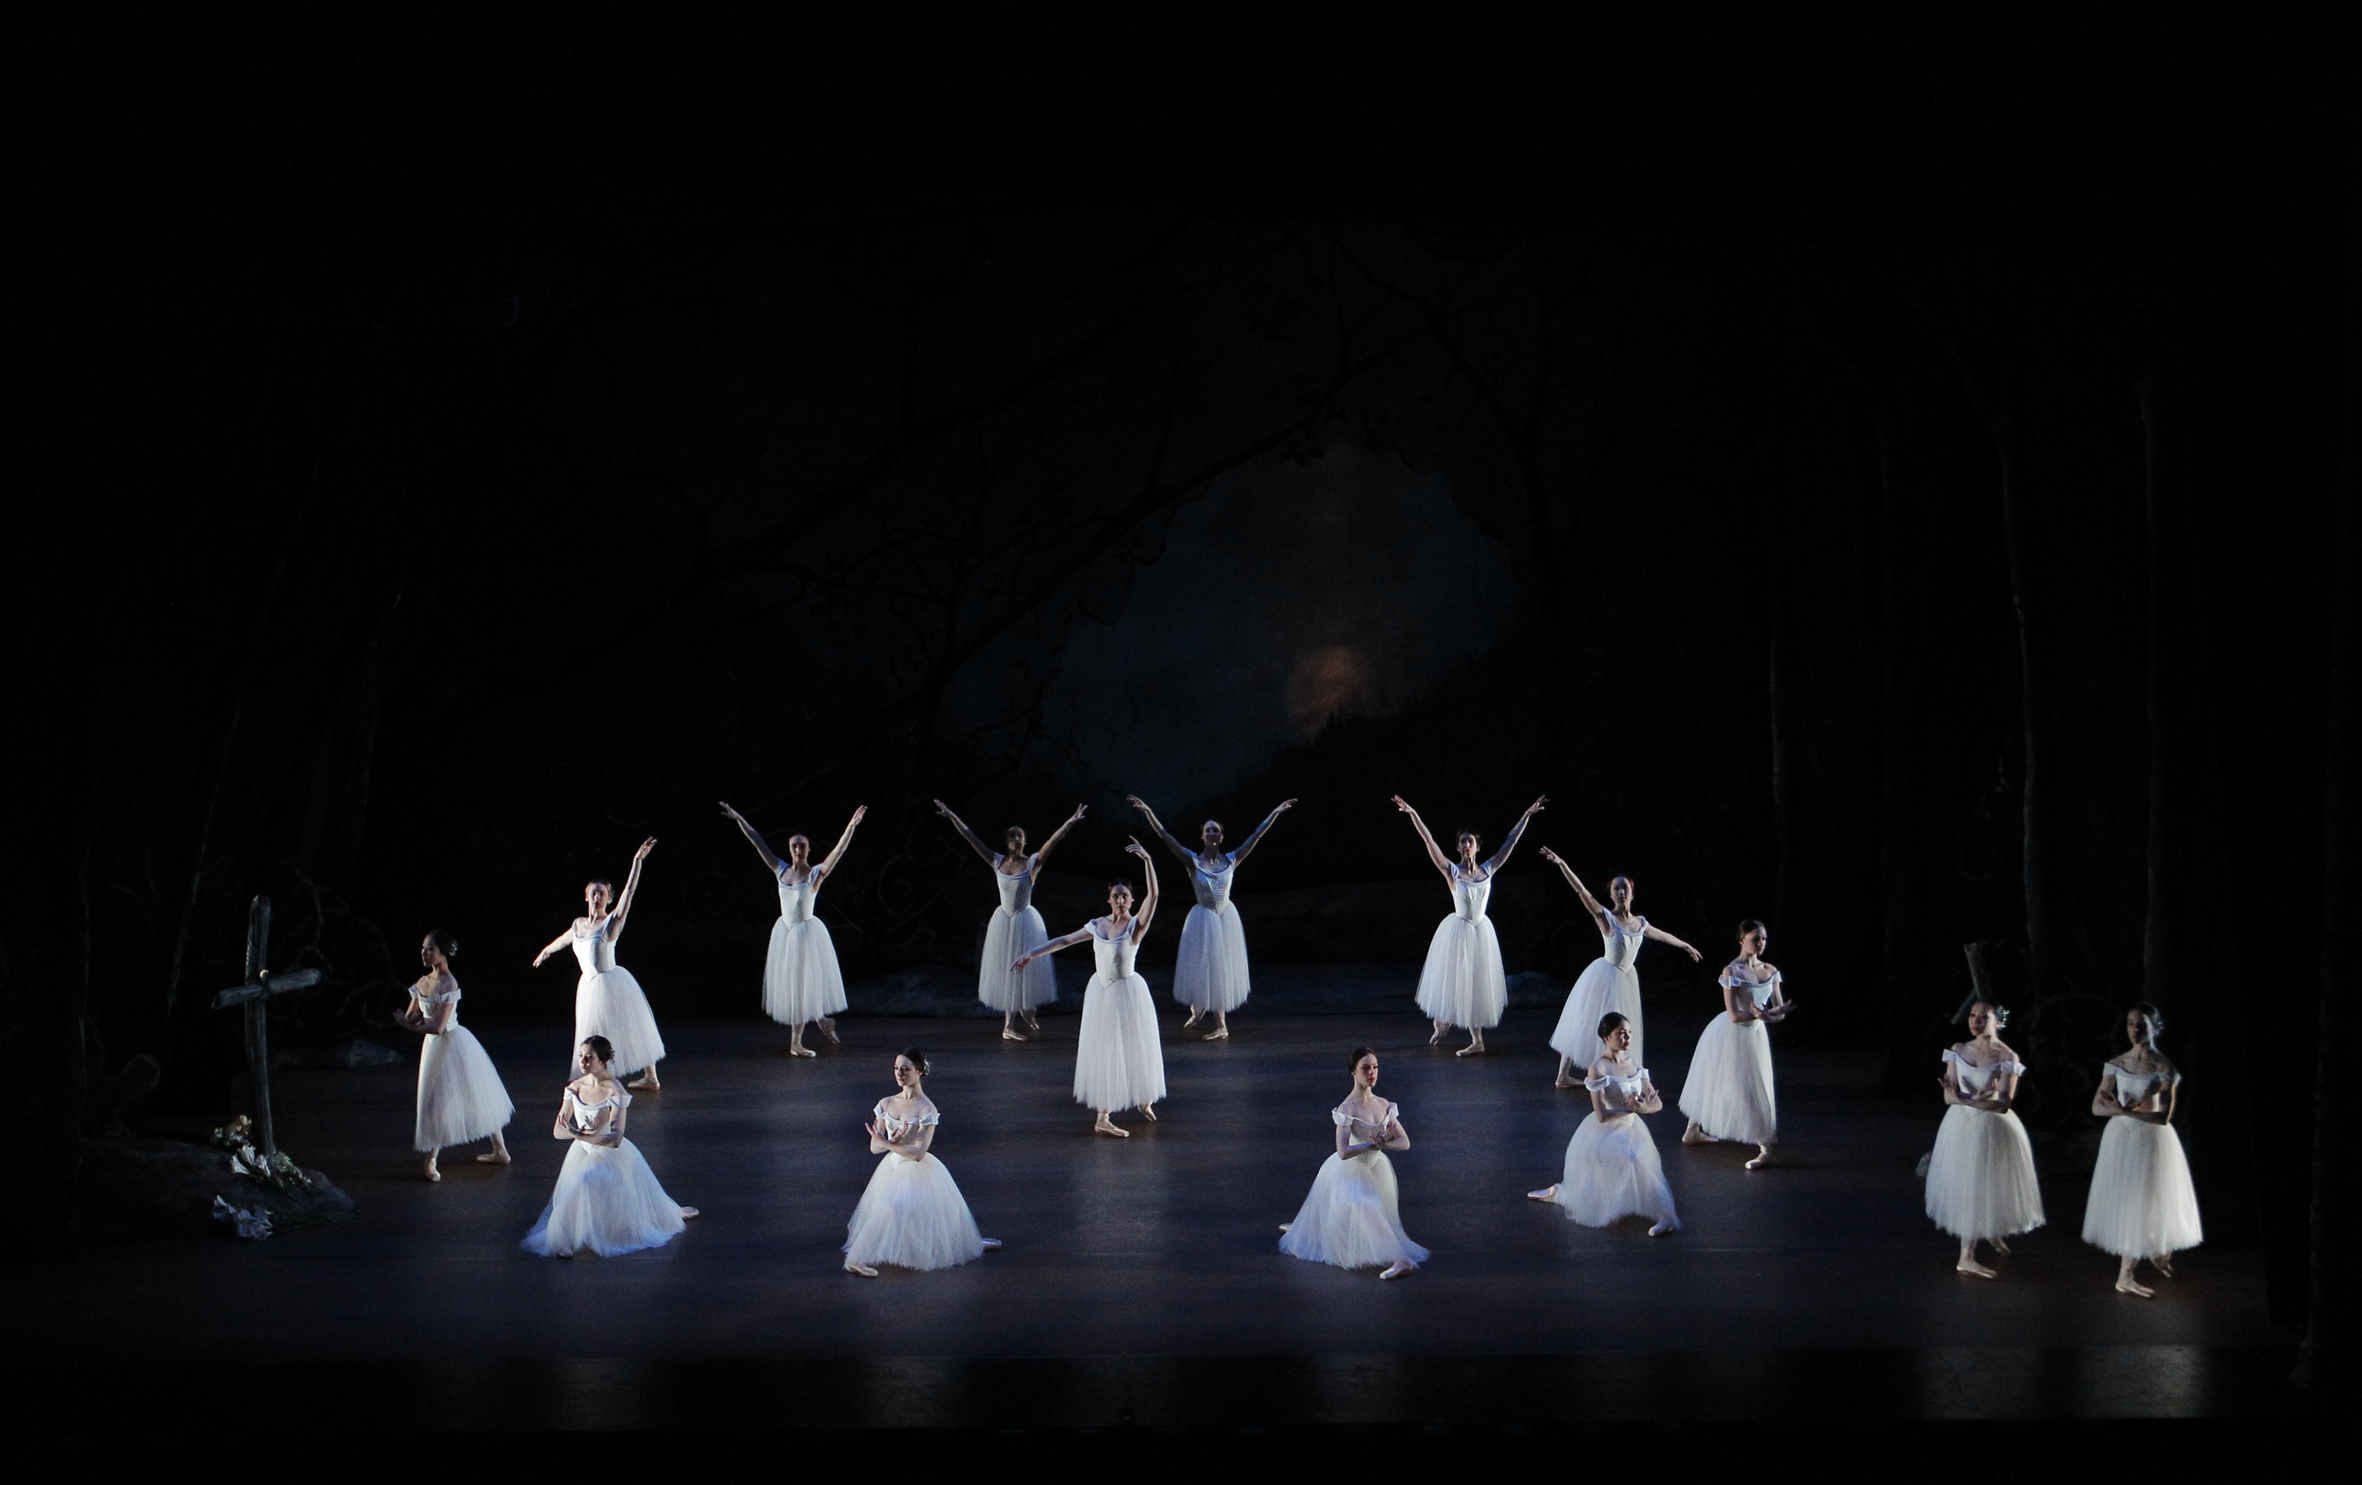 Birds eye view of dancers in white dresses on stage.